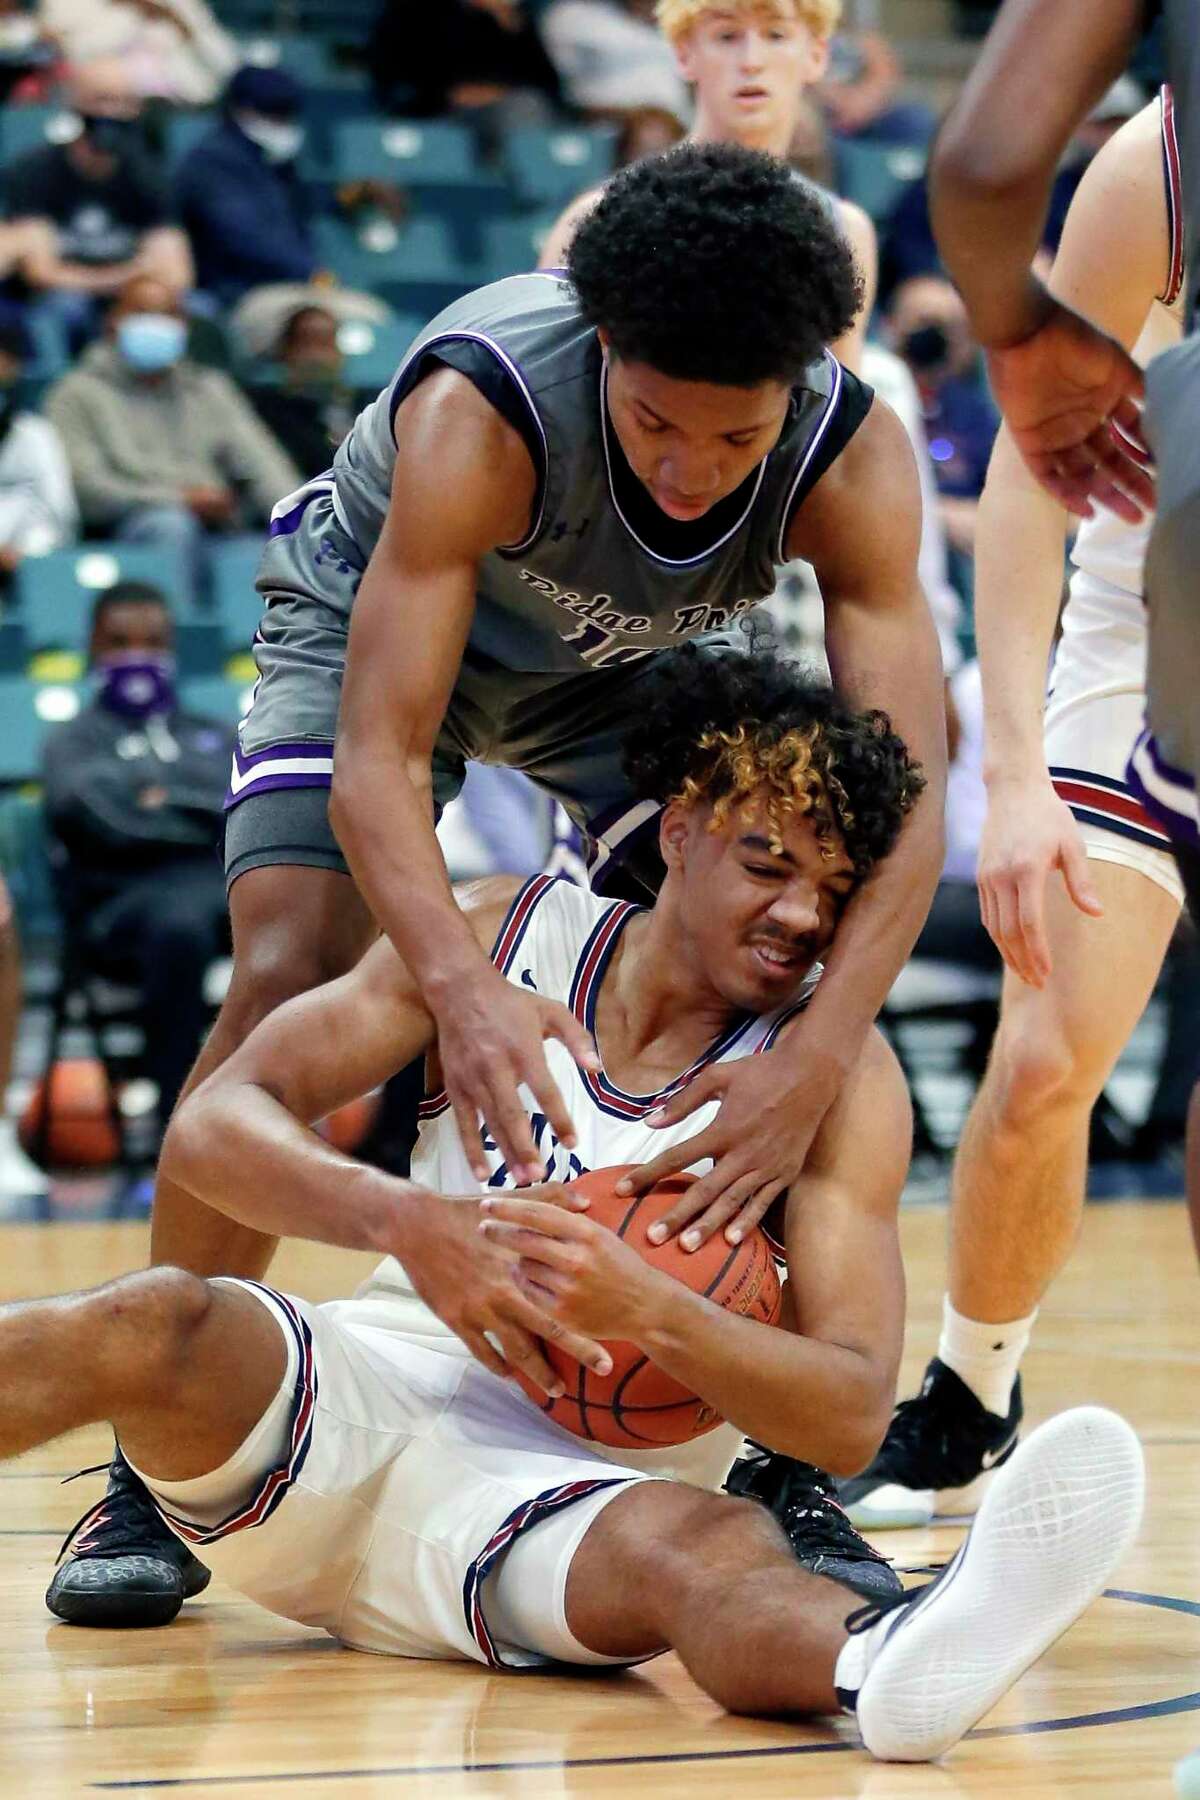 Tompkins’ B.B. Knight tries to keep the ball as Ridge Point’s Kolby Granger, top, reaches over during a Boys 6A bi-district high school basketball playoff game Saturday, Feb. 20, 2021 at the Merrell Center in Katy, TX.